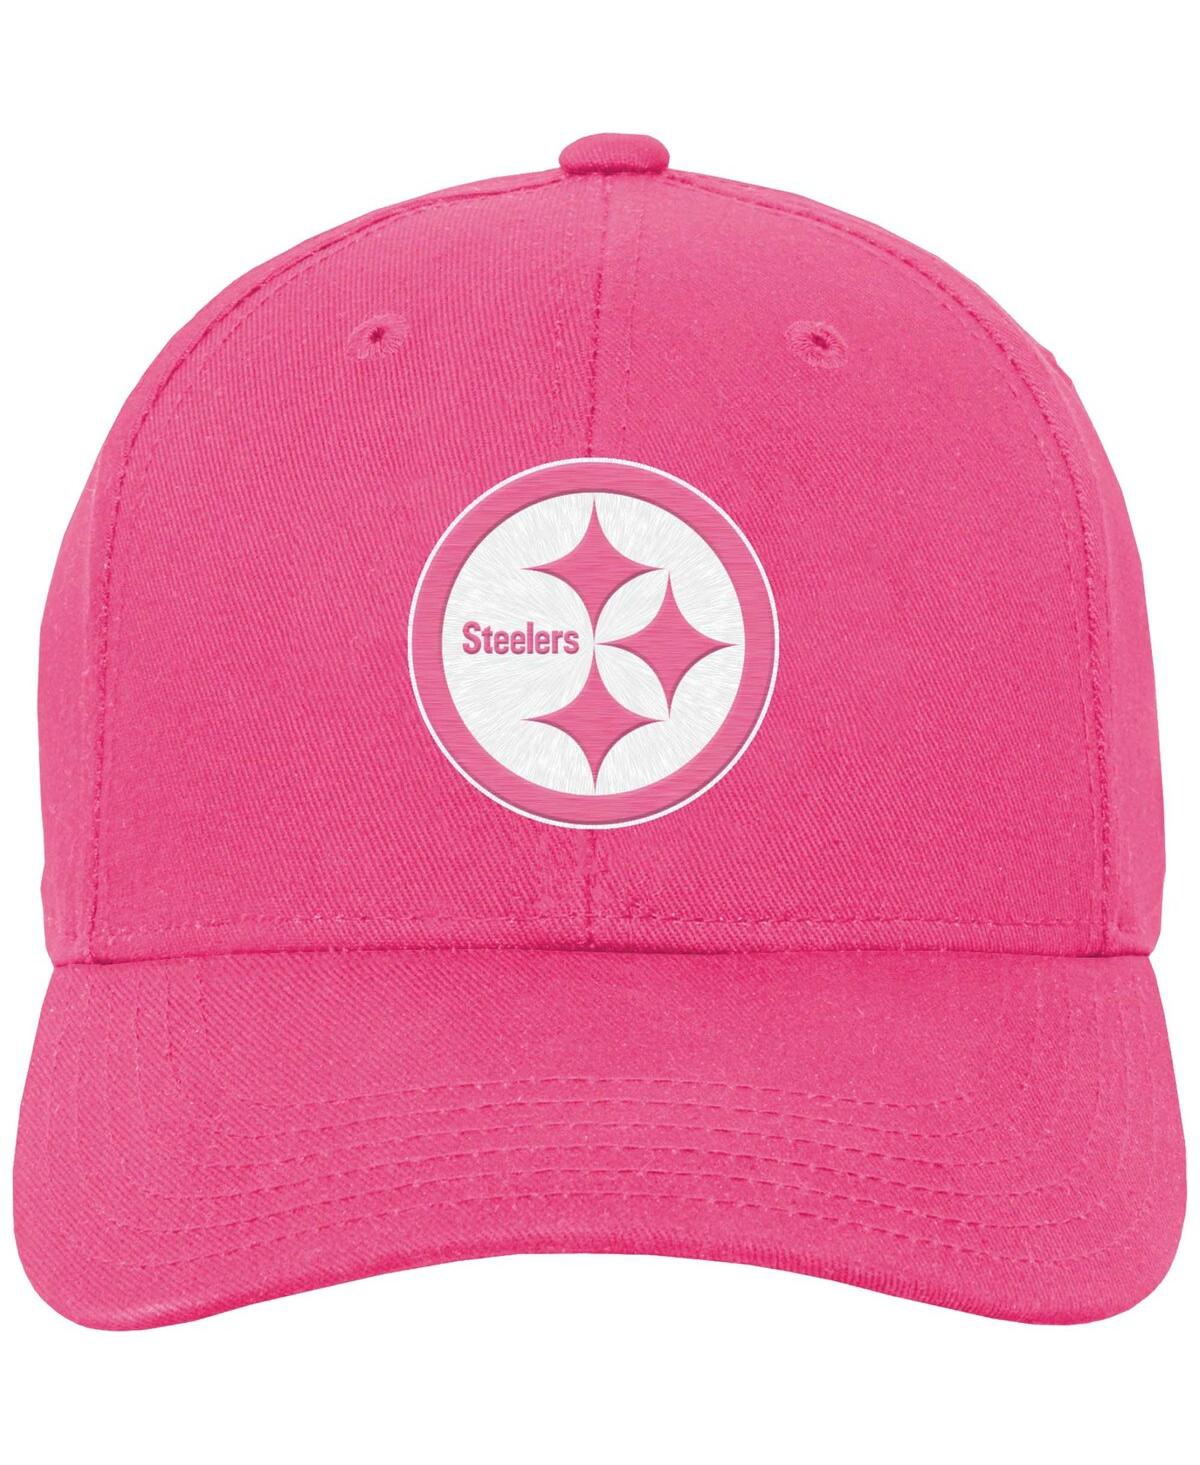 Shop Outerstuff Girl's Youth Pink Pittsburgh Steelers Adjustable Hat